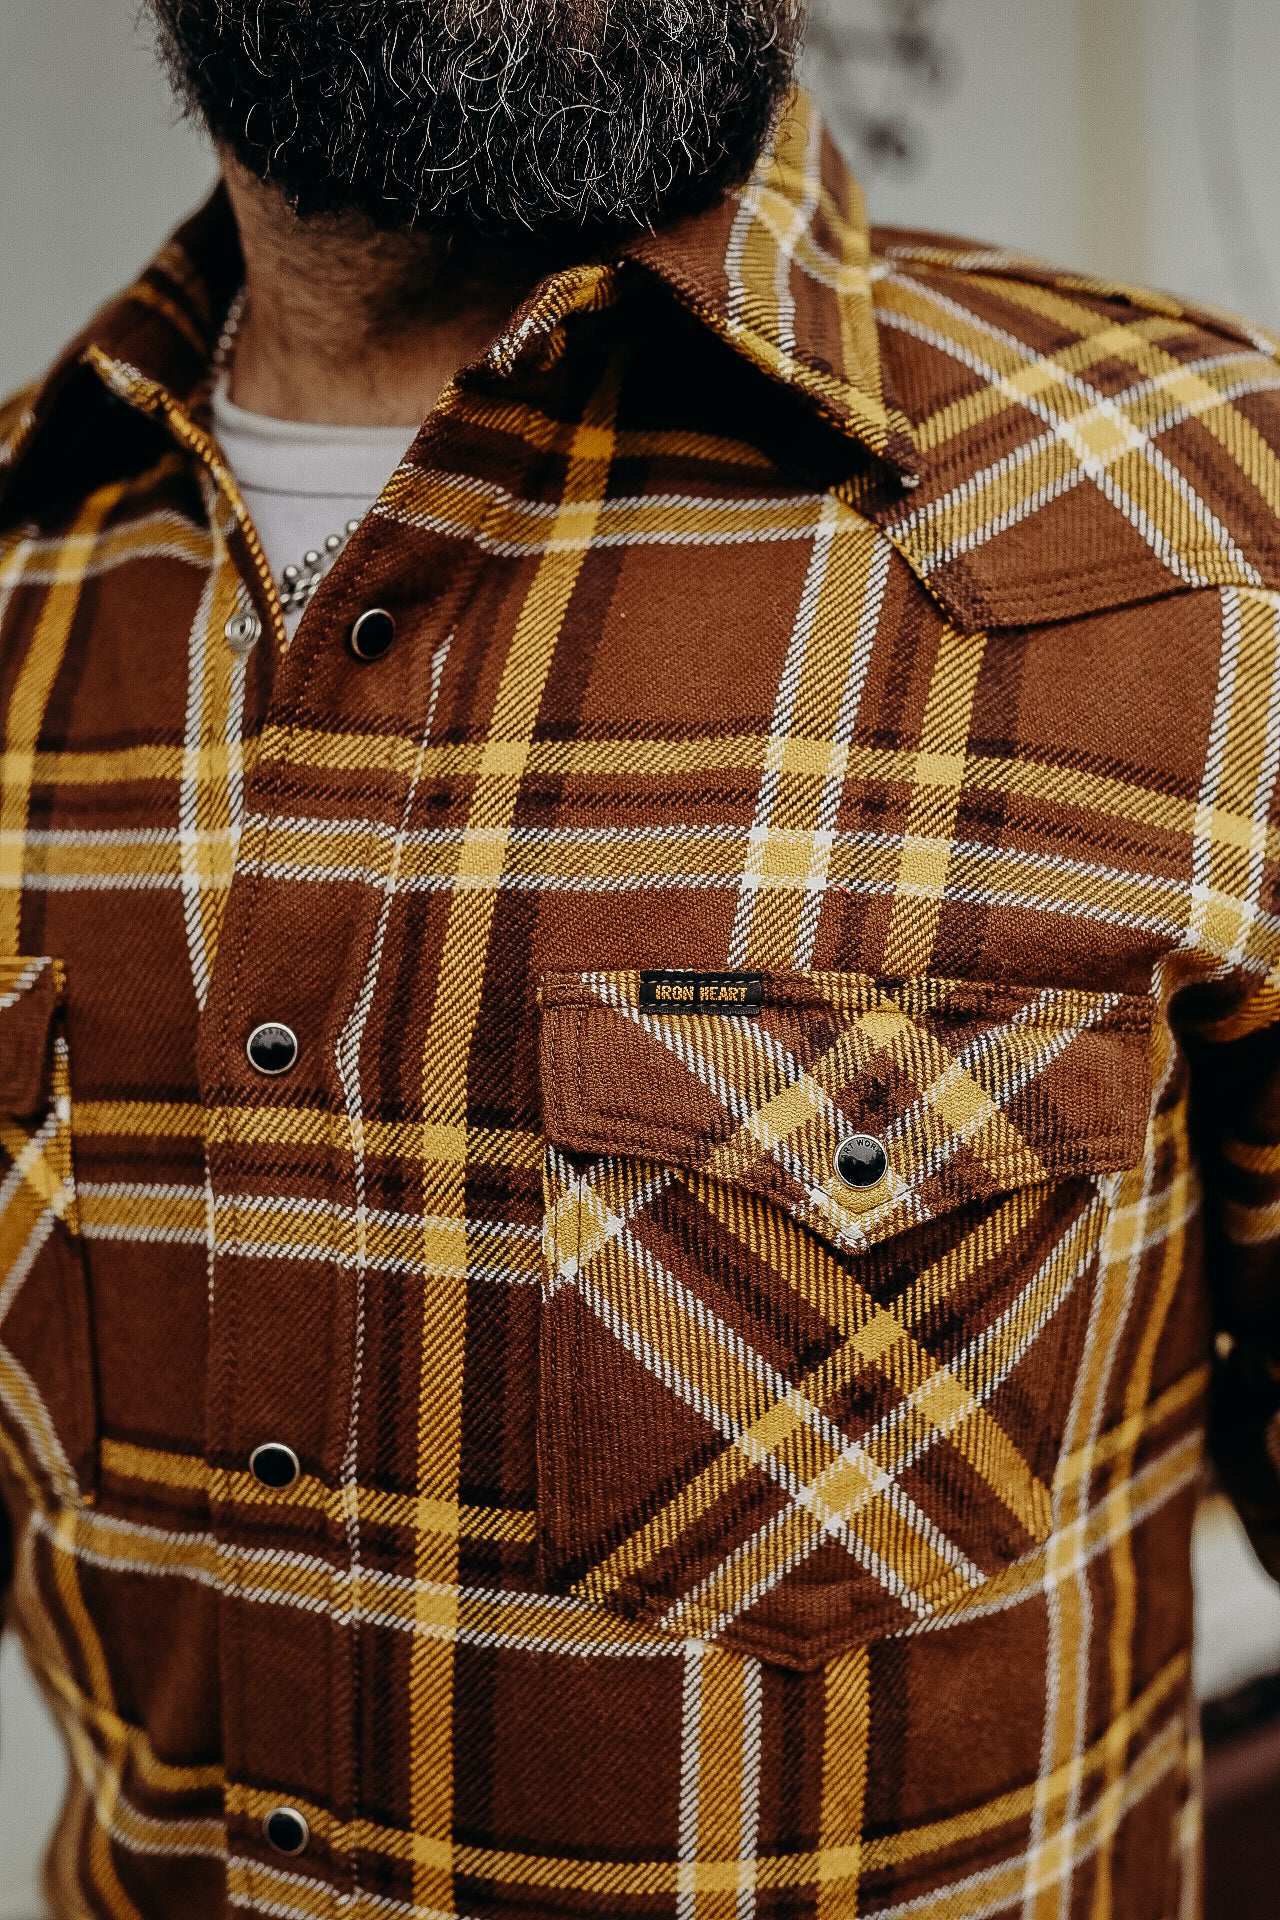 Ultra Heavy Flannel Crazy Check Western Shirt - Brown